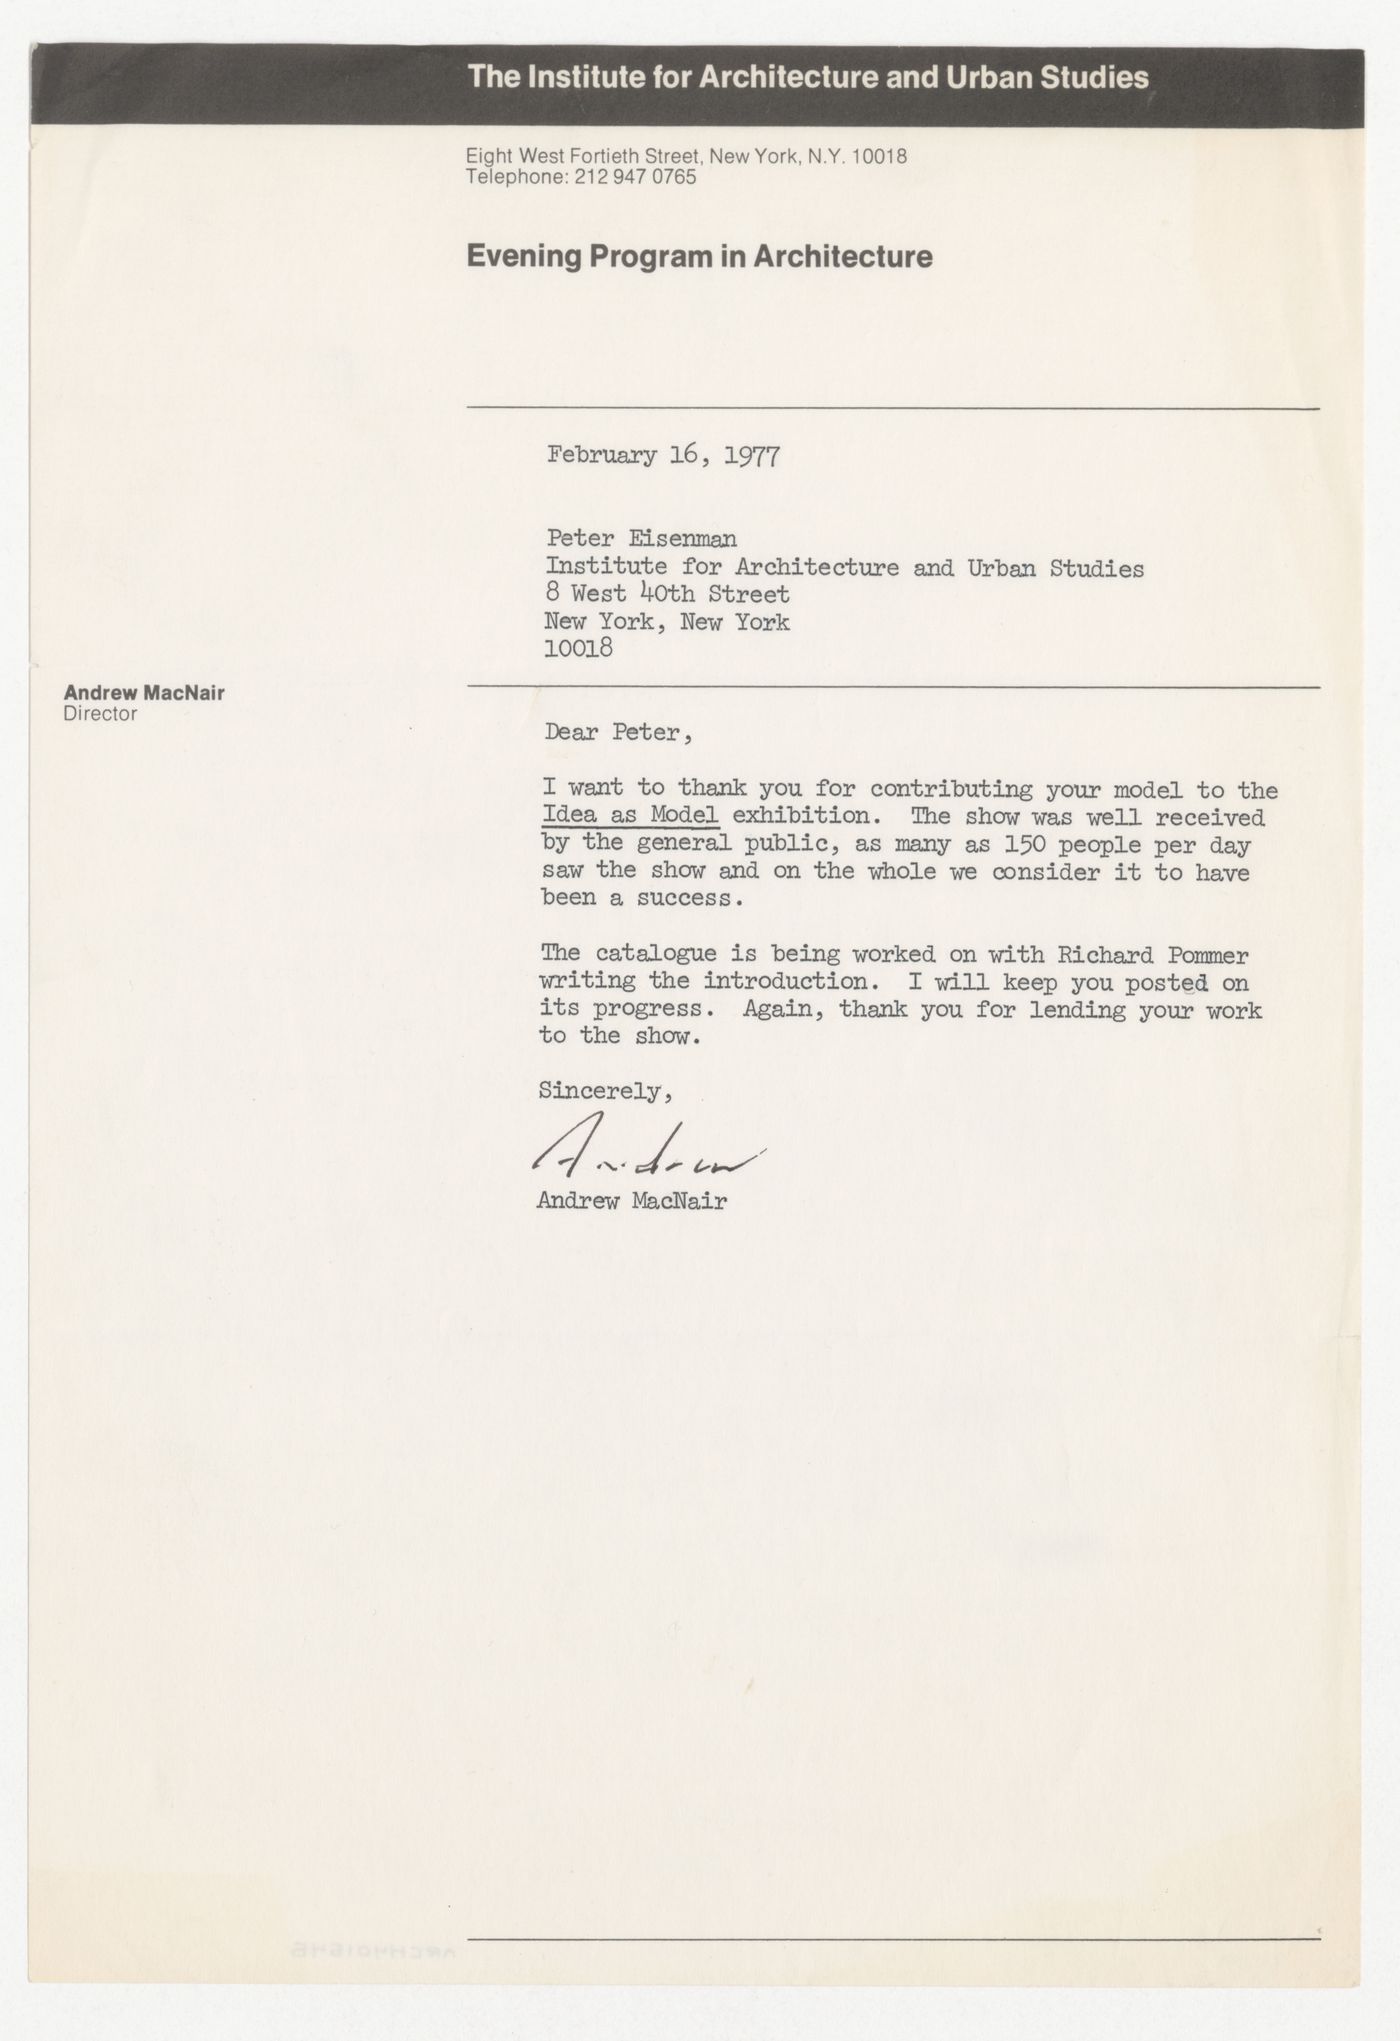 Letter from Andrew MacNair to Peter D. Eisenman about Idea as Model exhibition